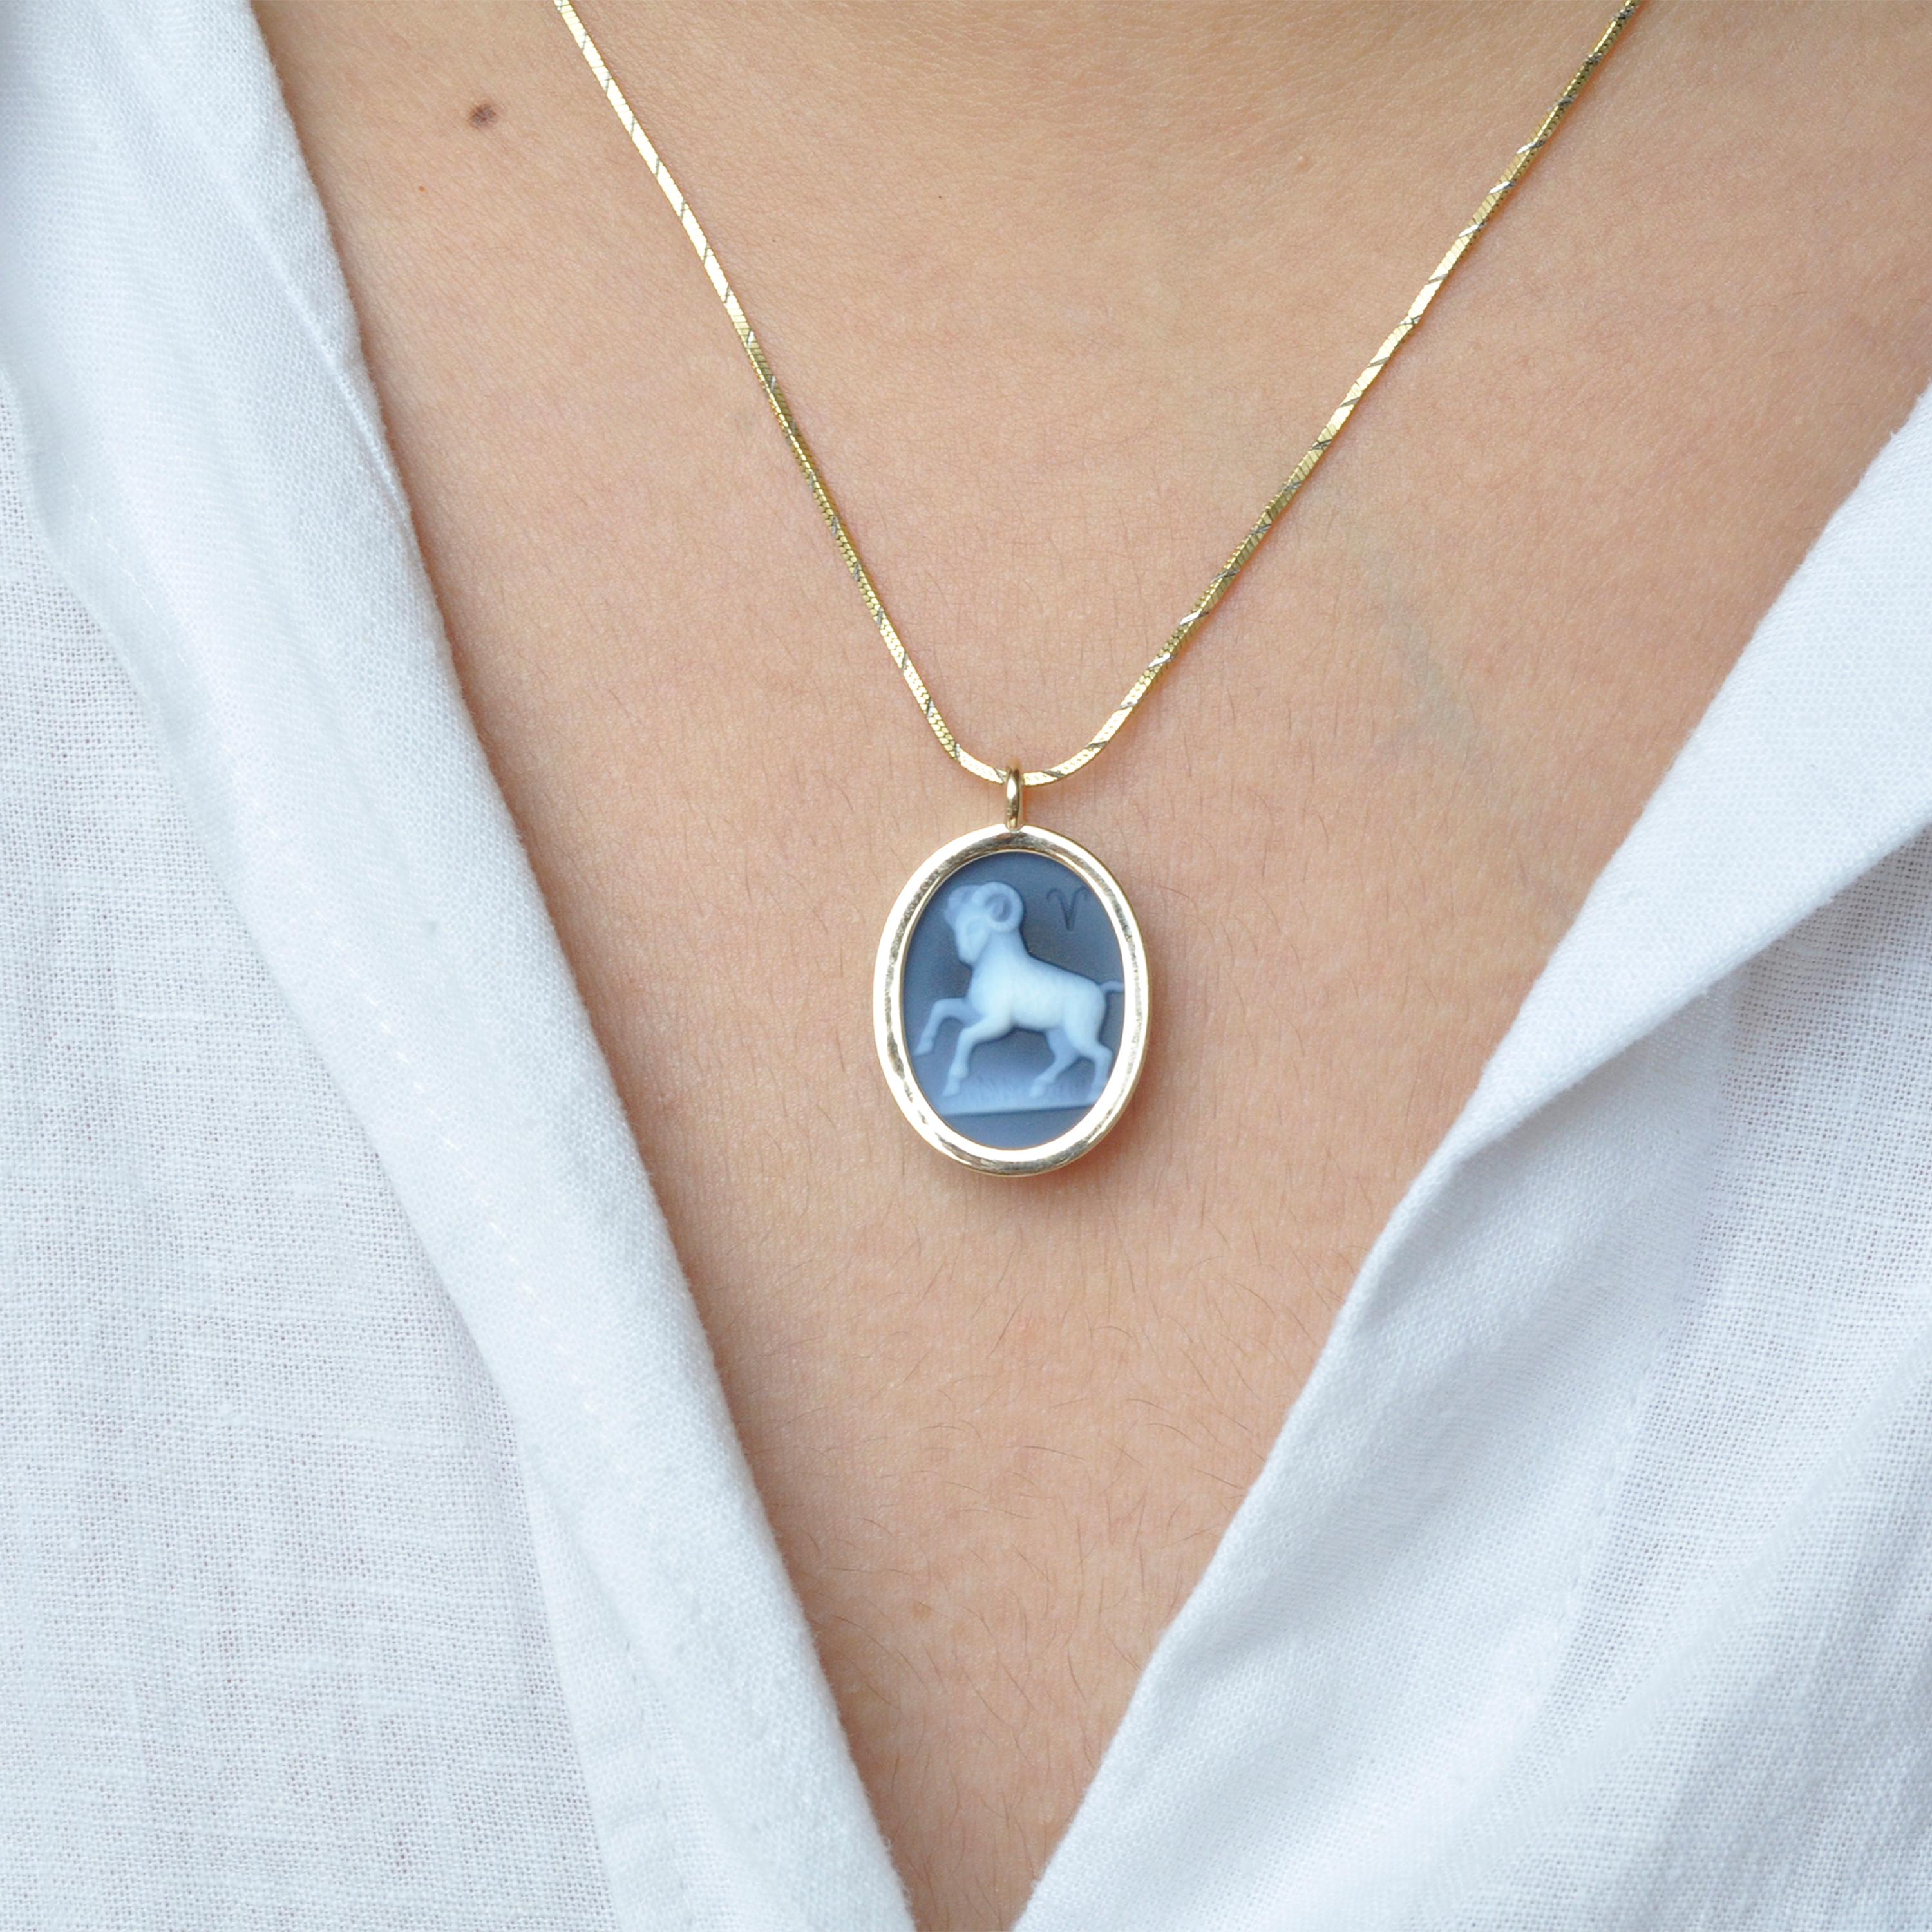 The reversible pendant necklace featuring an Aries sun sign carving cameo zodiac diamond in 14 karat gold is a stunning piece of jewelry that combines exquisite craftsmanship, elegance, and personalization. With its reversible design, it offers two